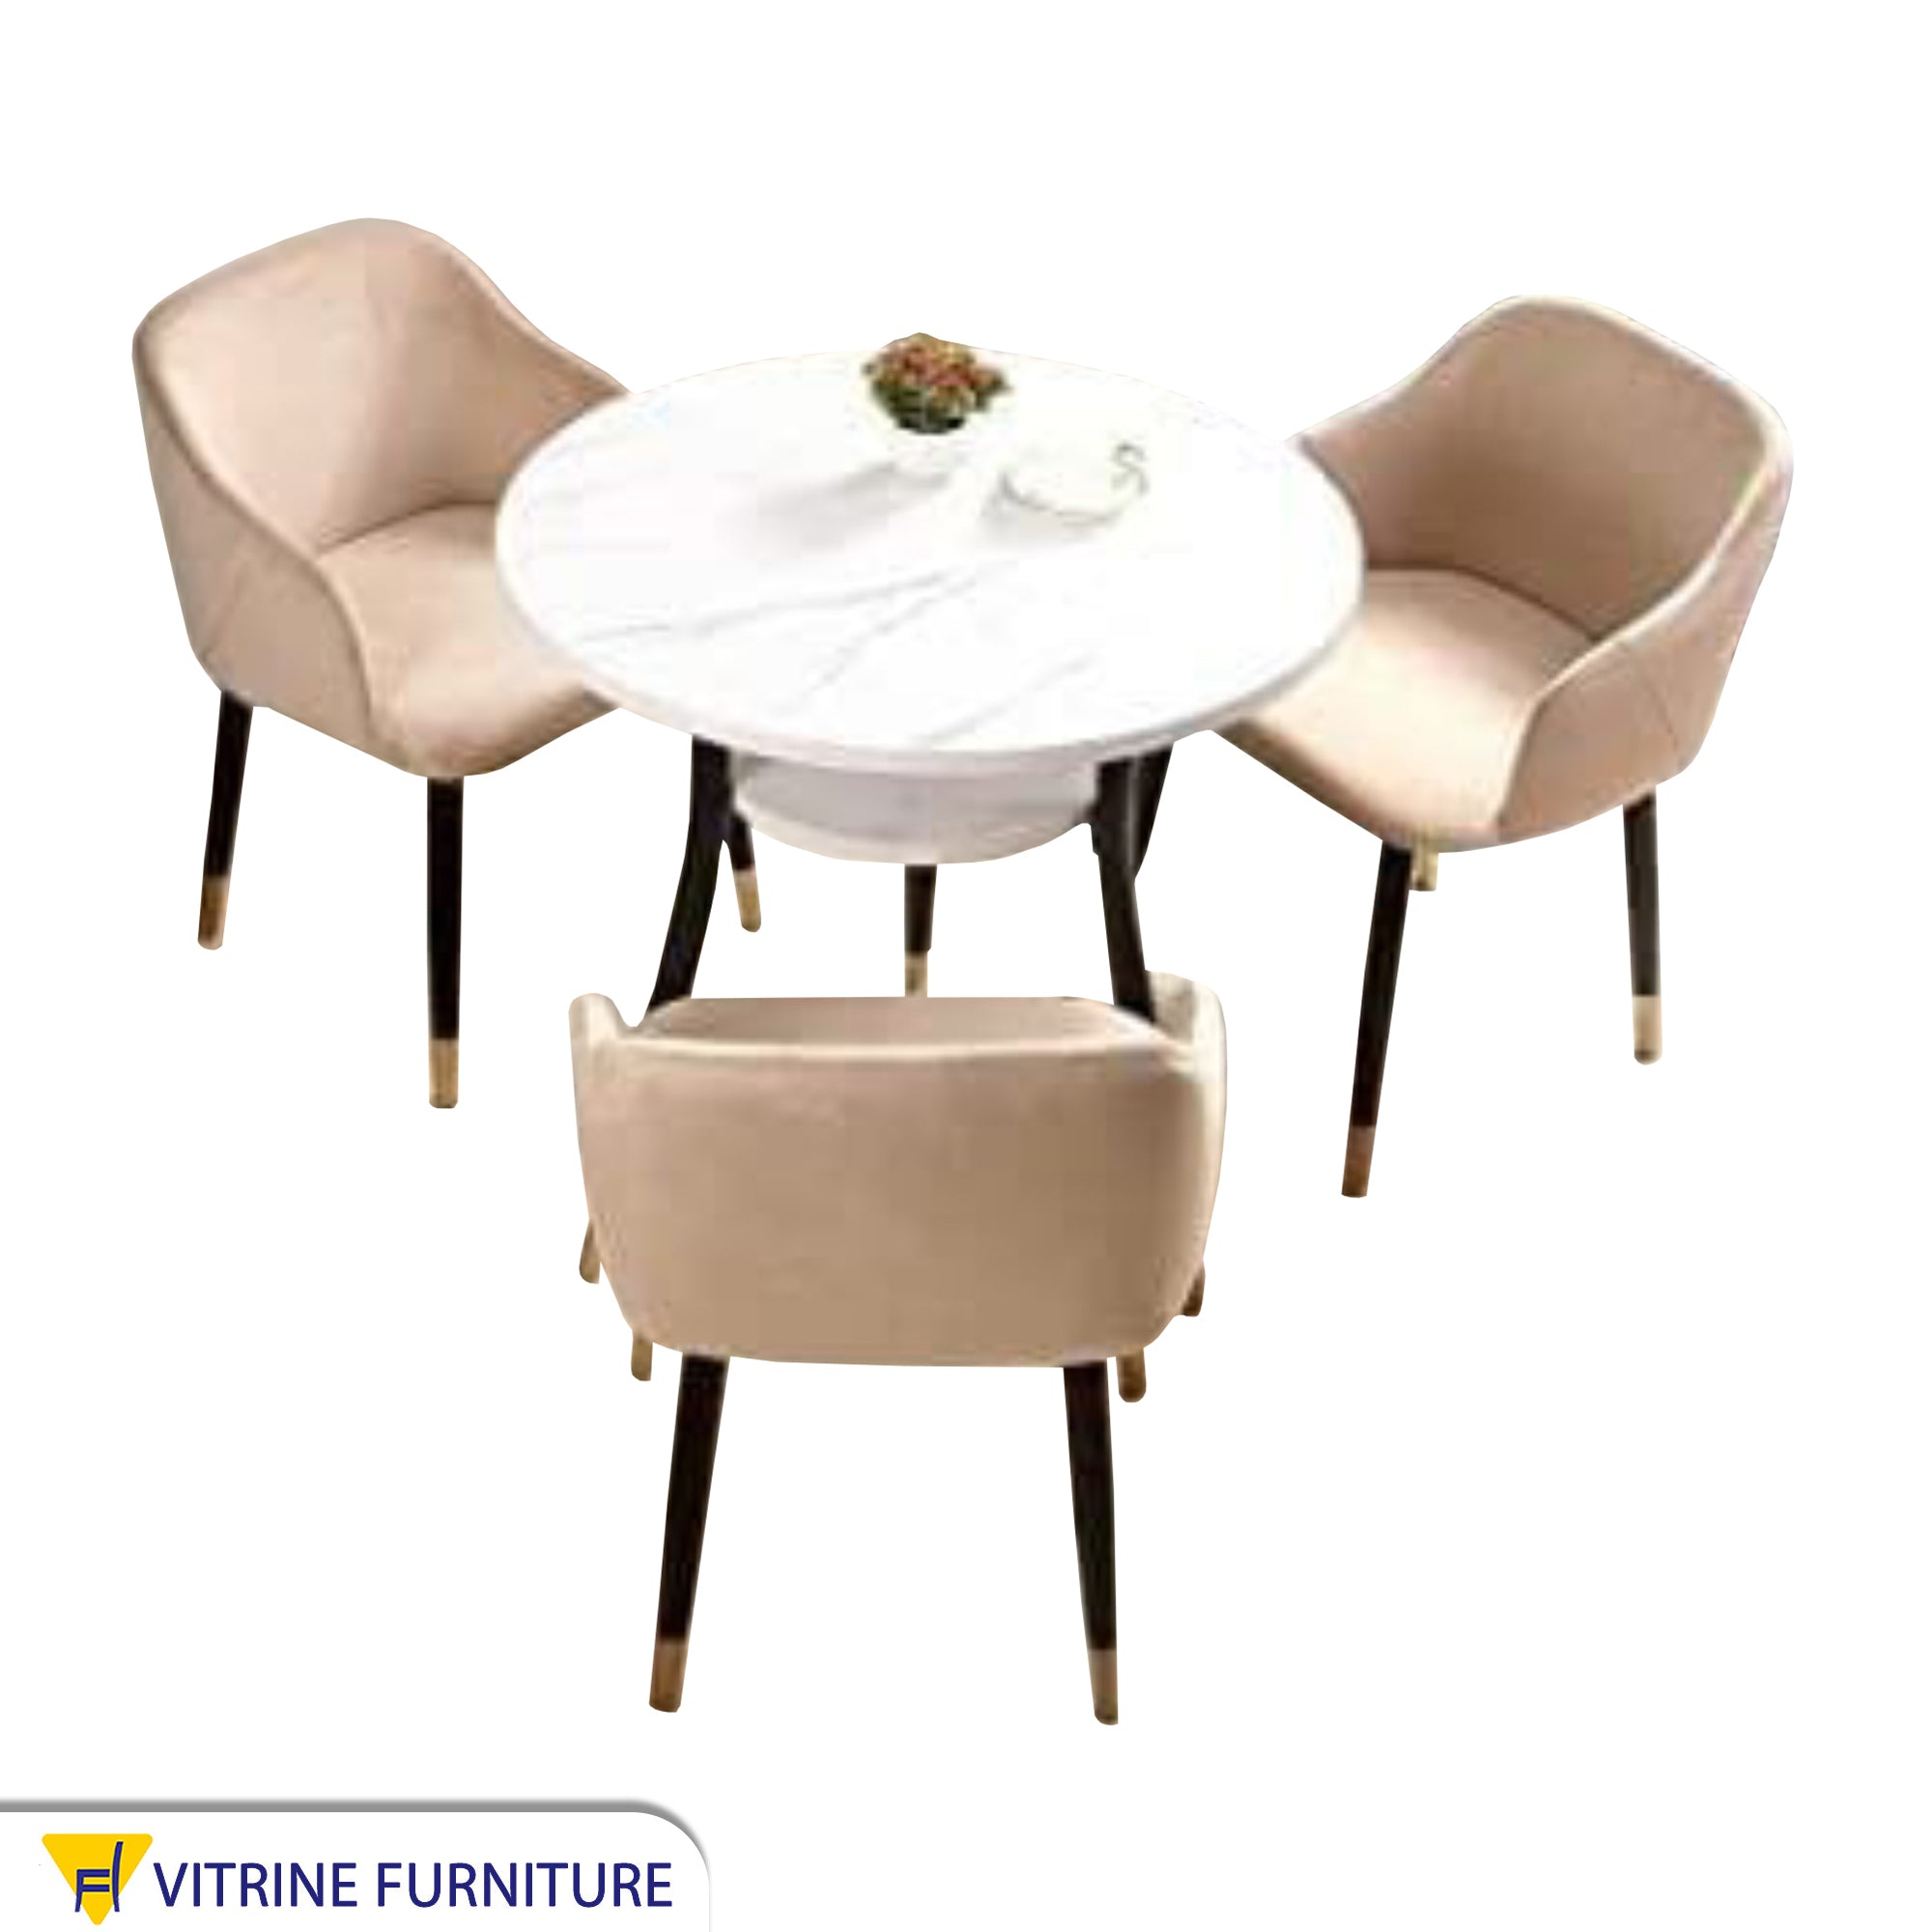 Circular dining table with three chairs